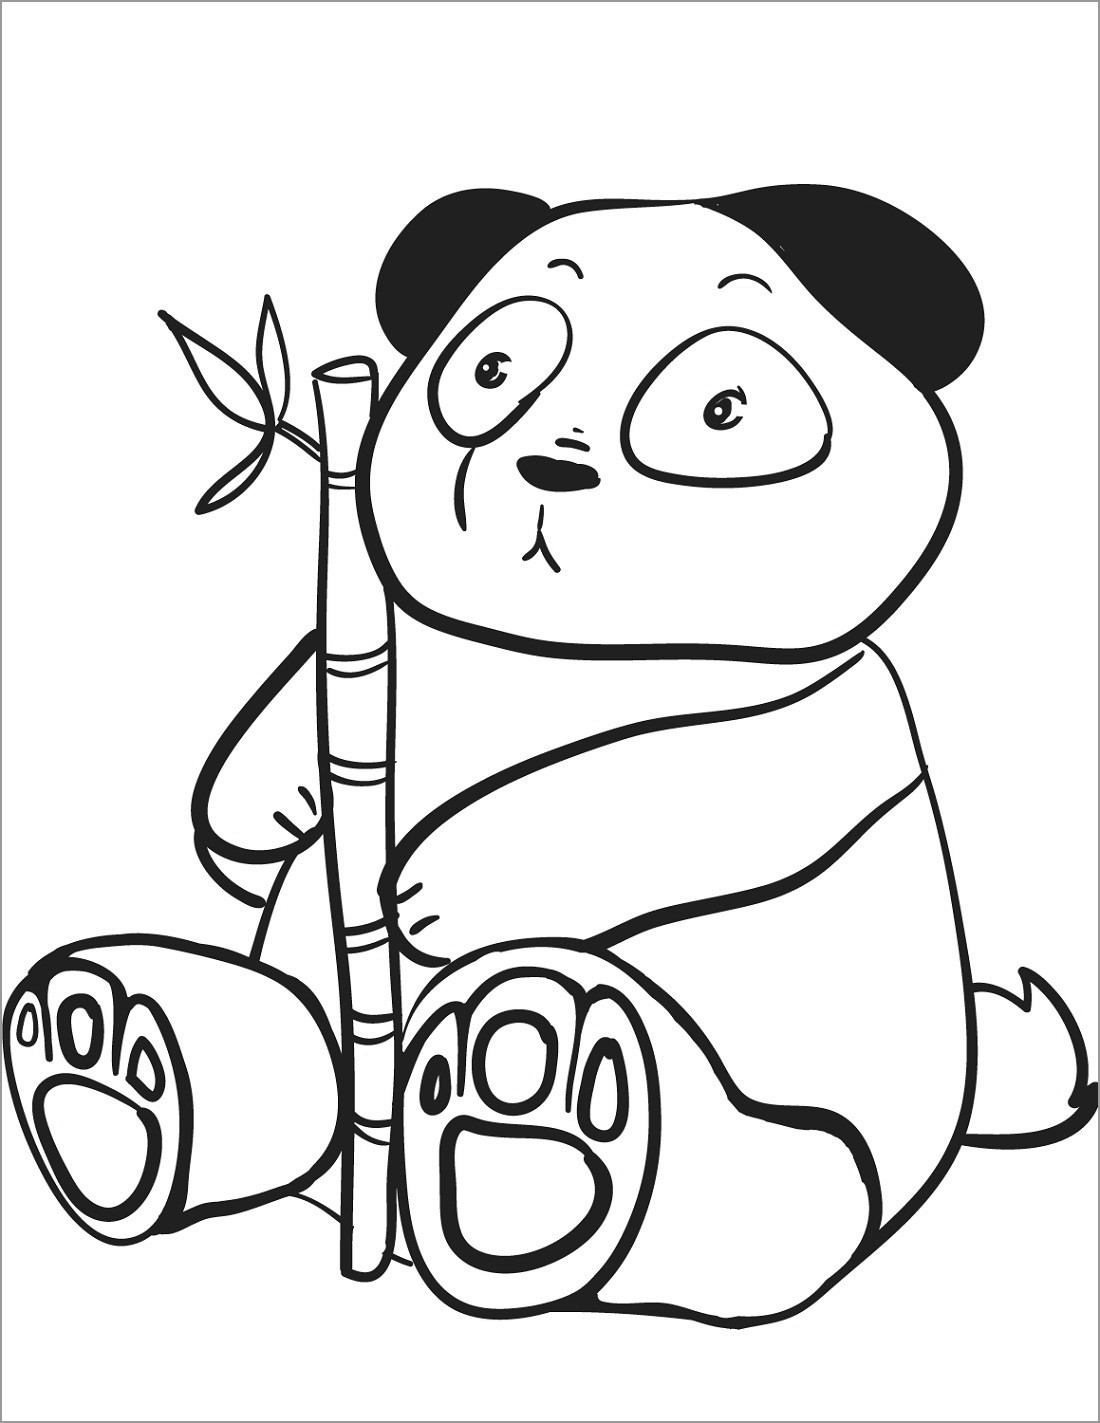 Panda Coloring Pages for Preschool